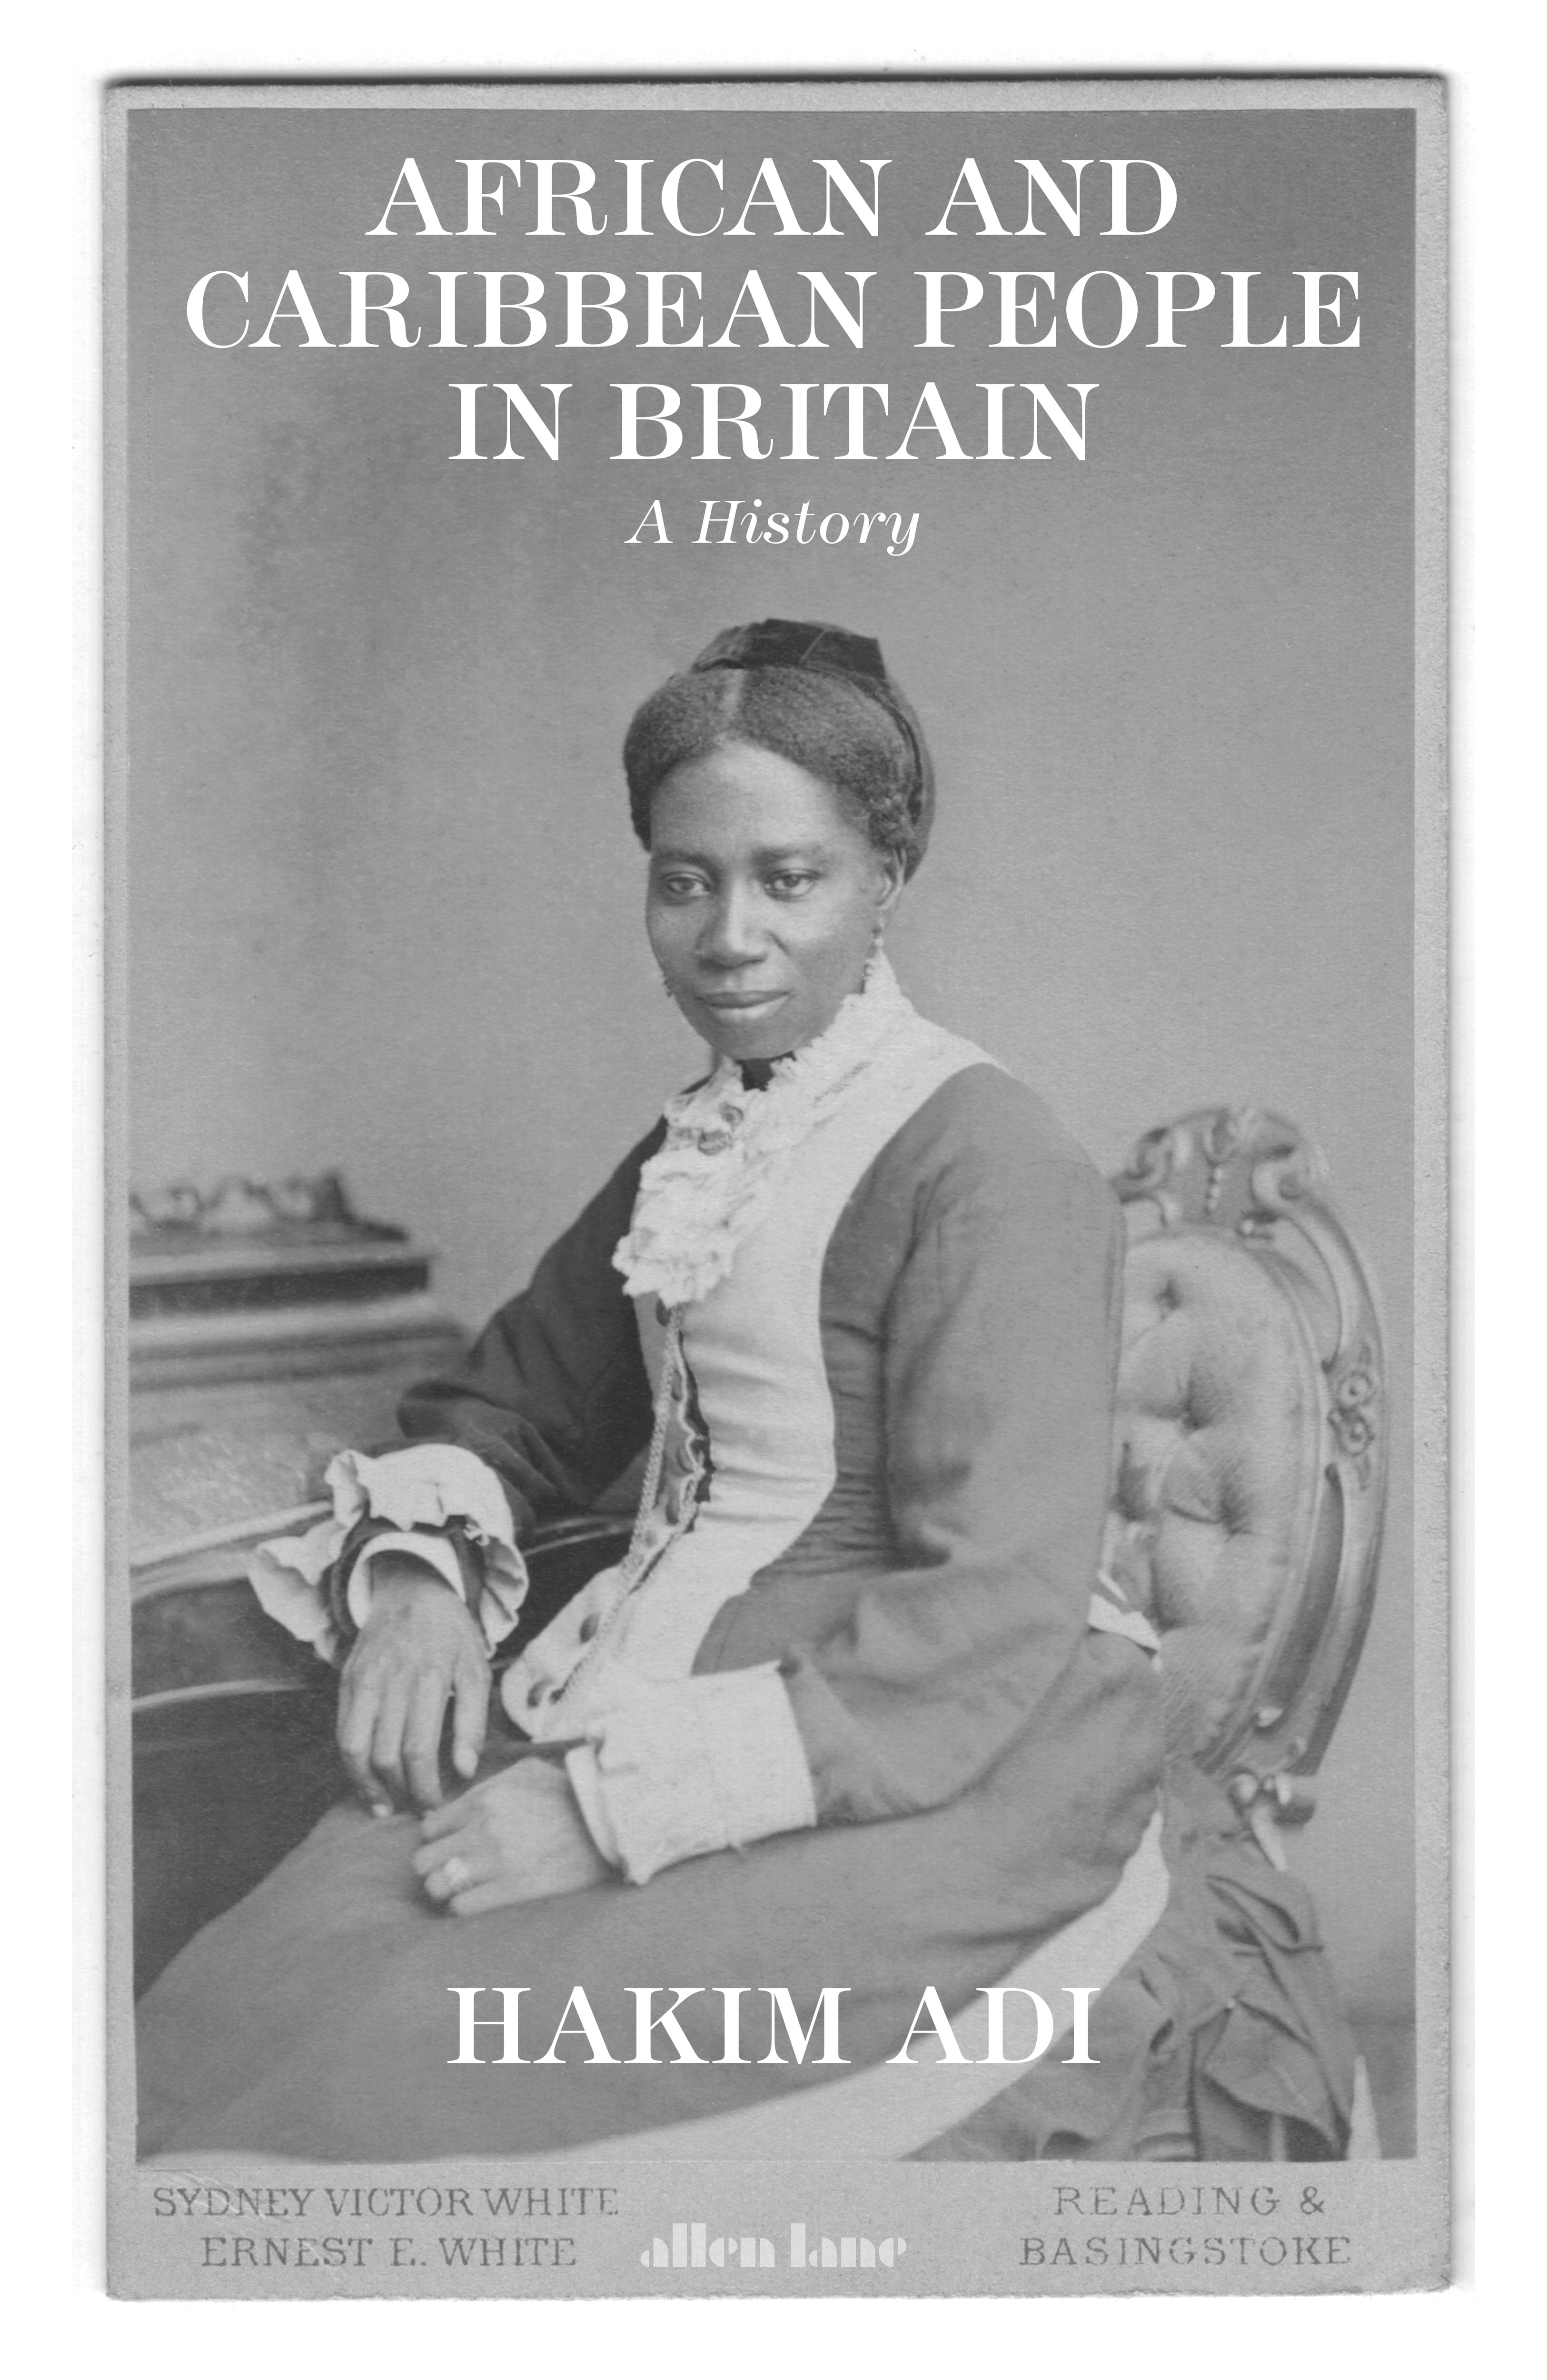 Book “African and Caribbean People in Britain” by Hakim Adi — September 1, 2022